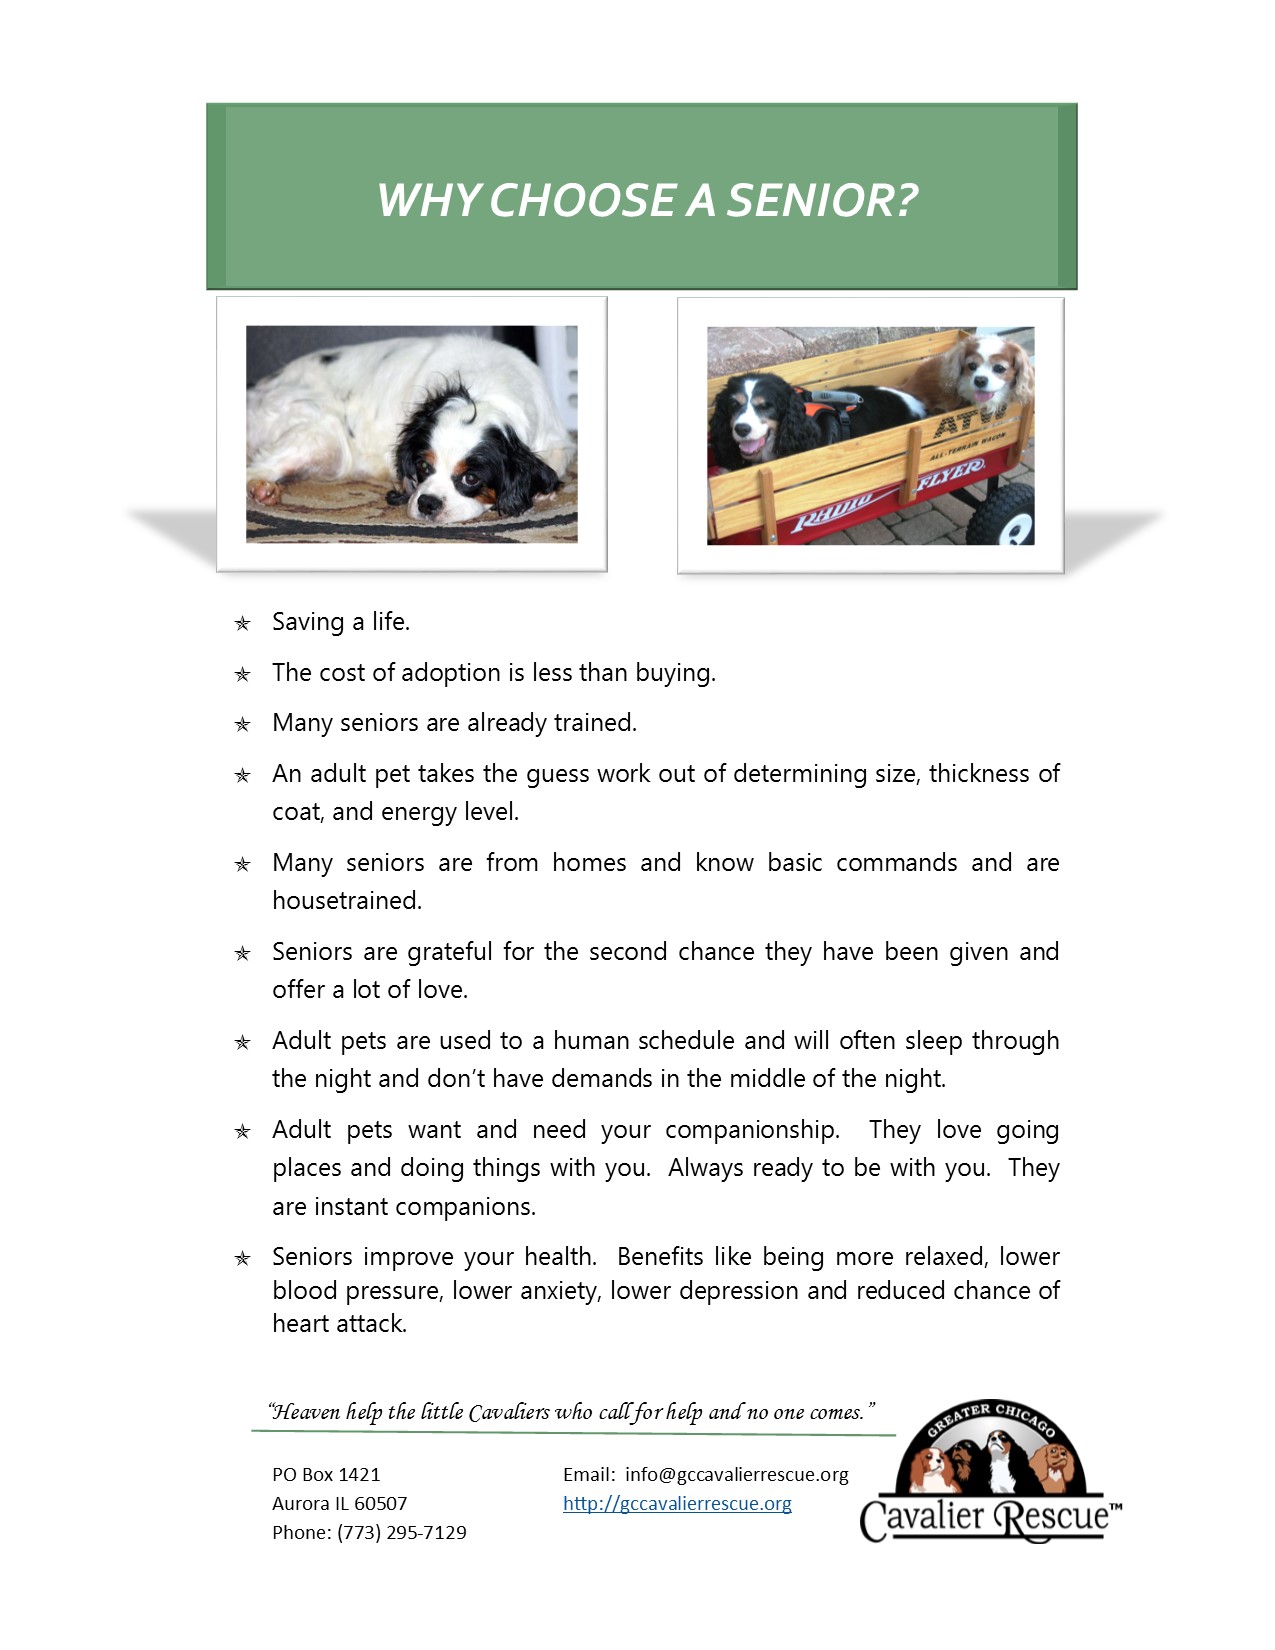 Benefits Of A Senior Cavalier Greater Chicago Cavalier Rescue